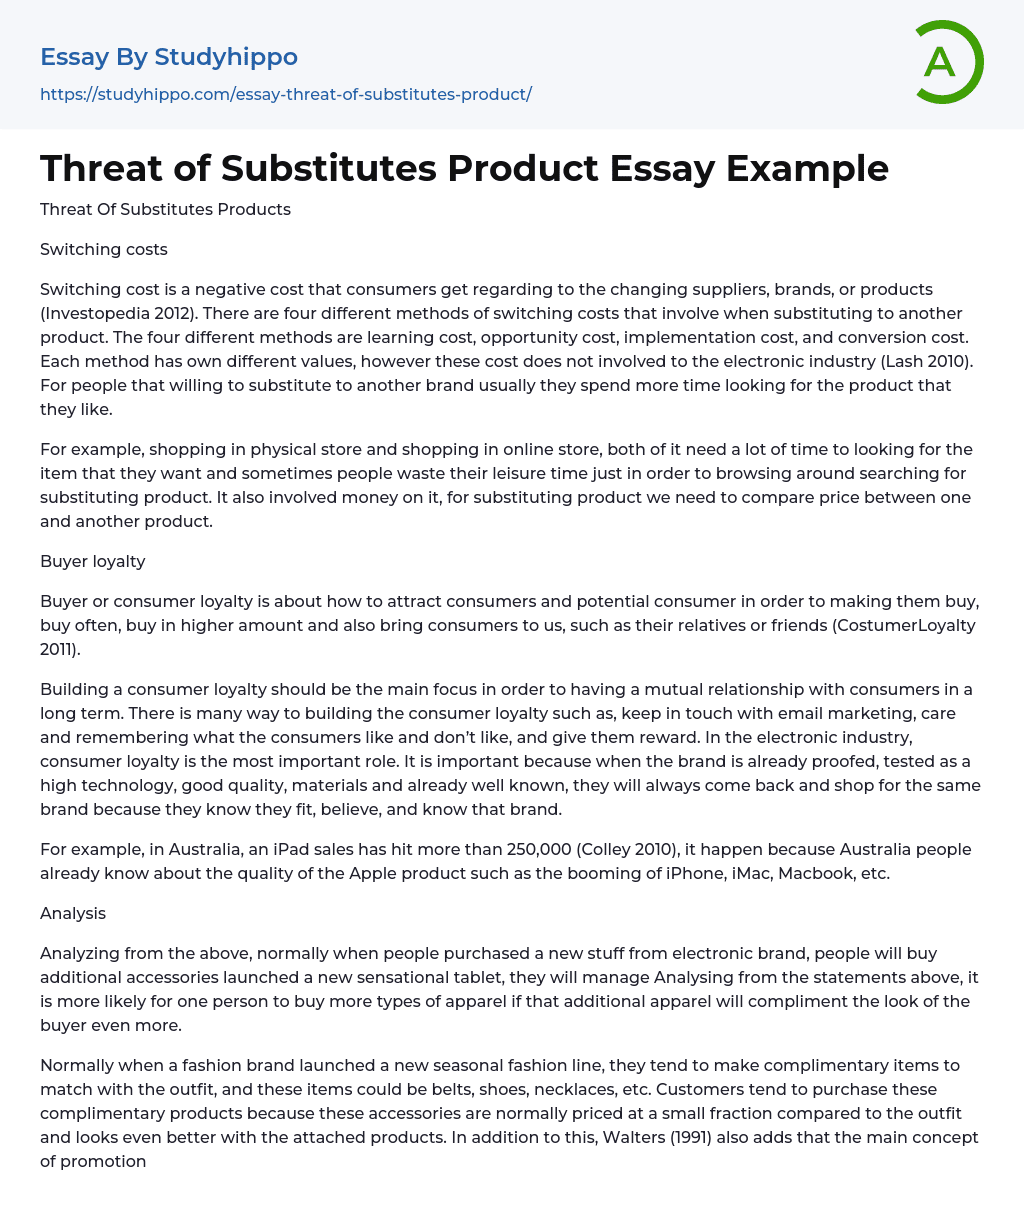 Threat of Substitutes Product Essay Example